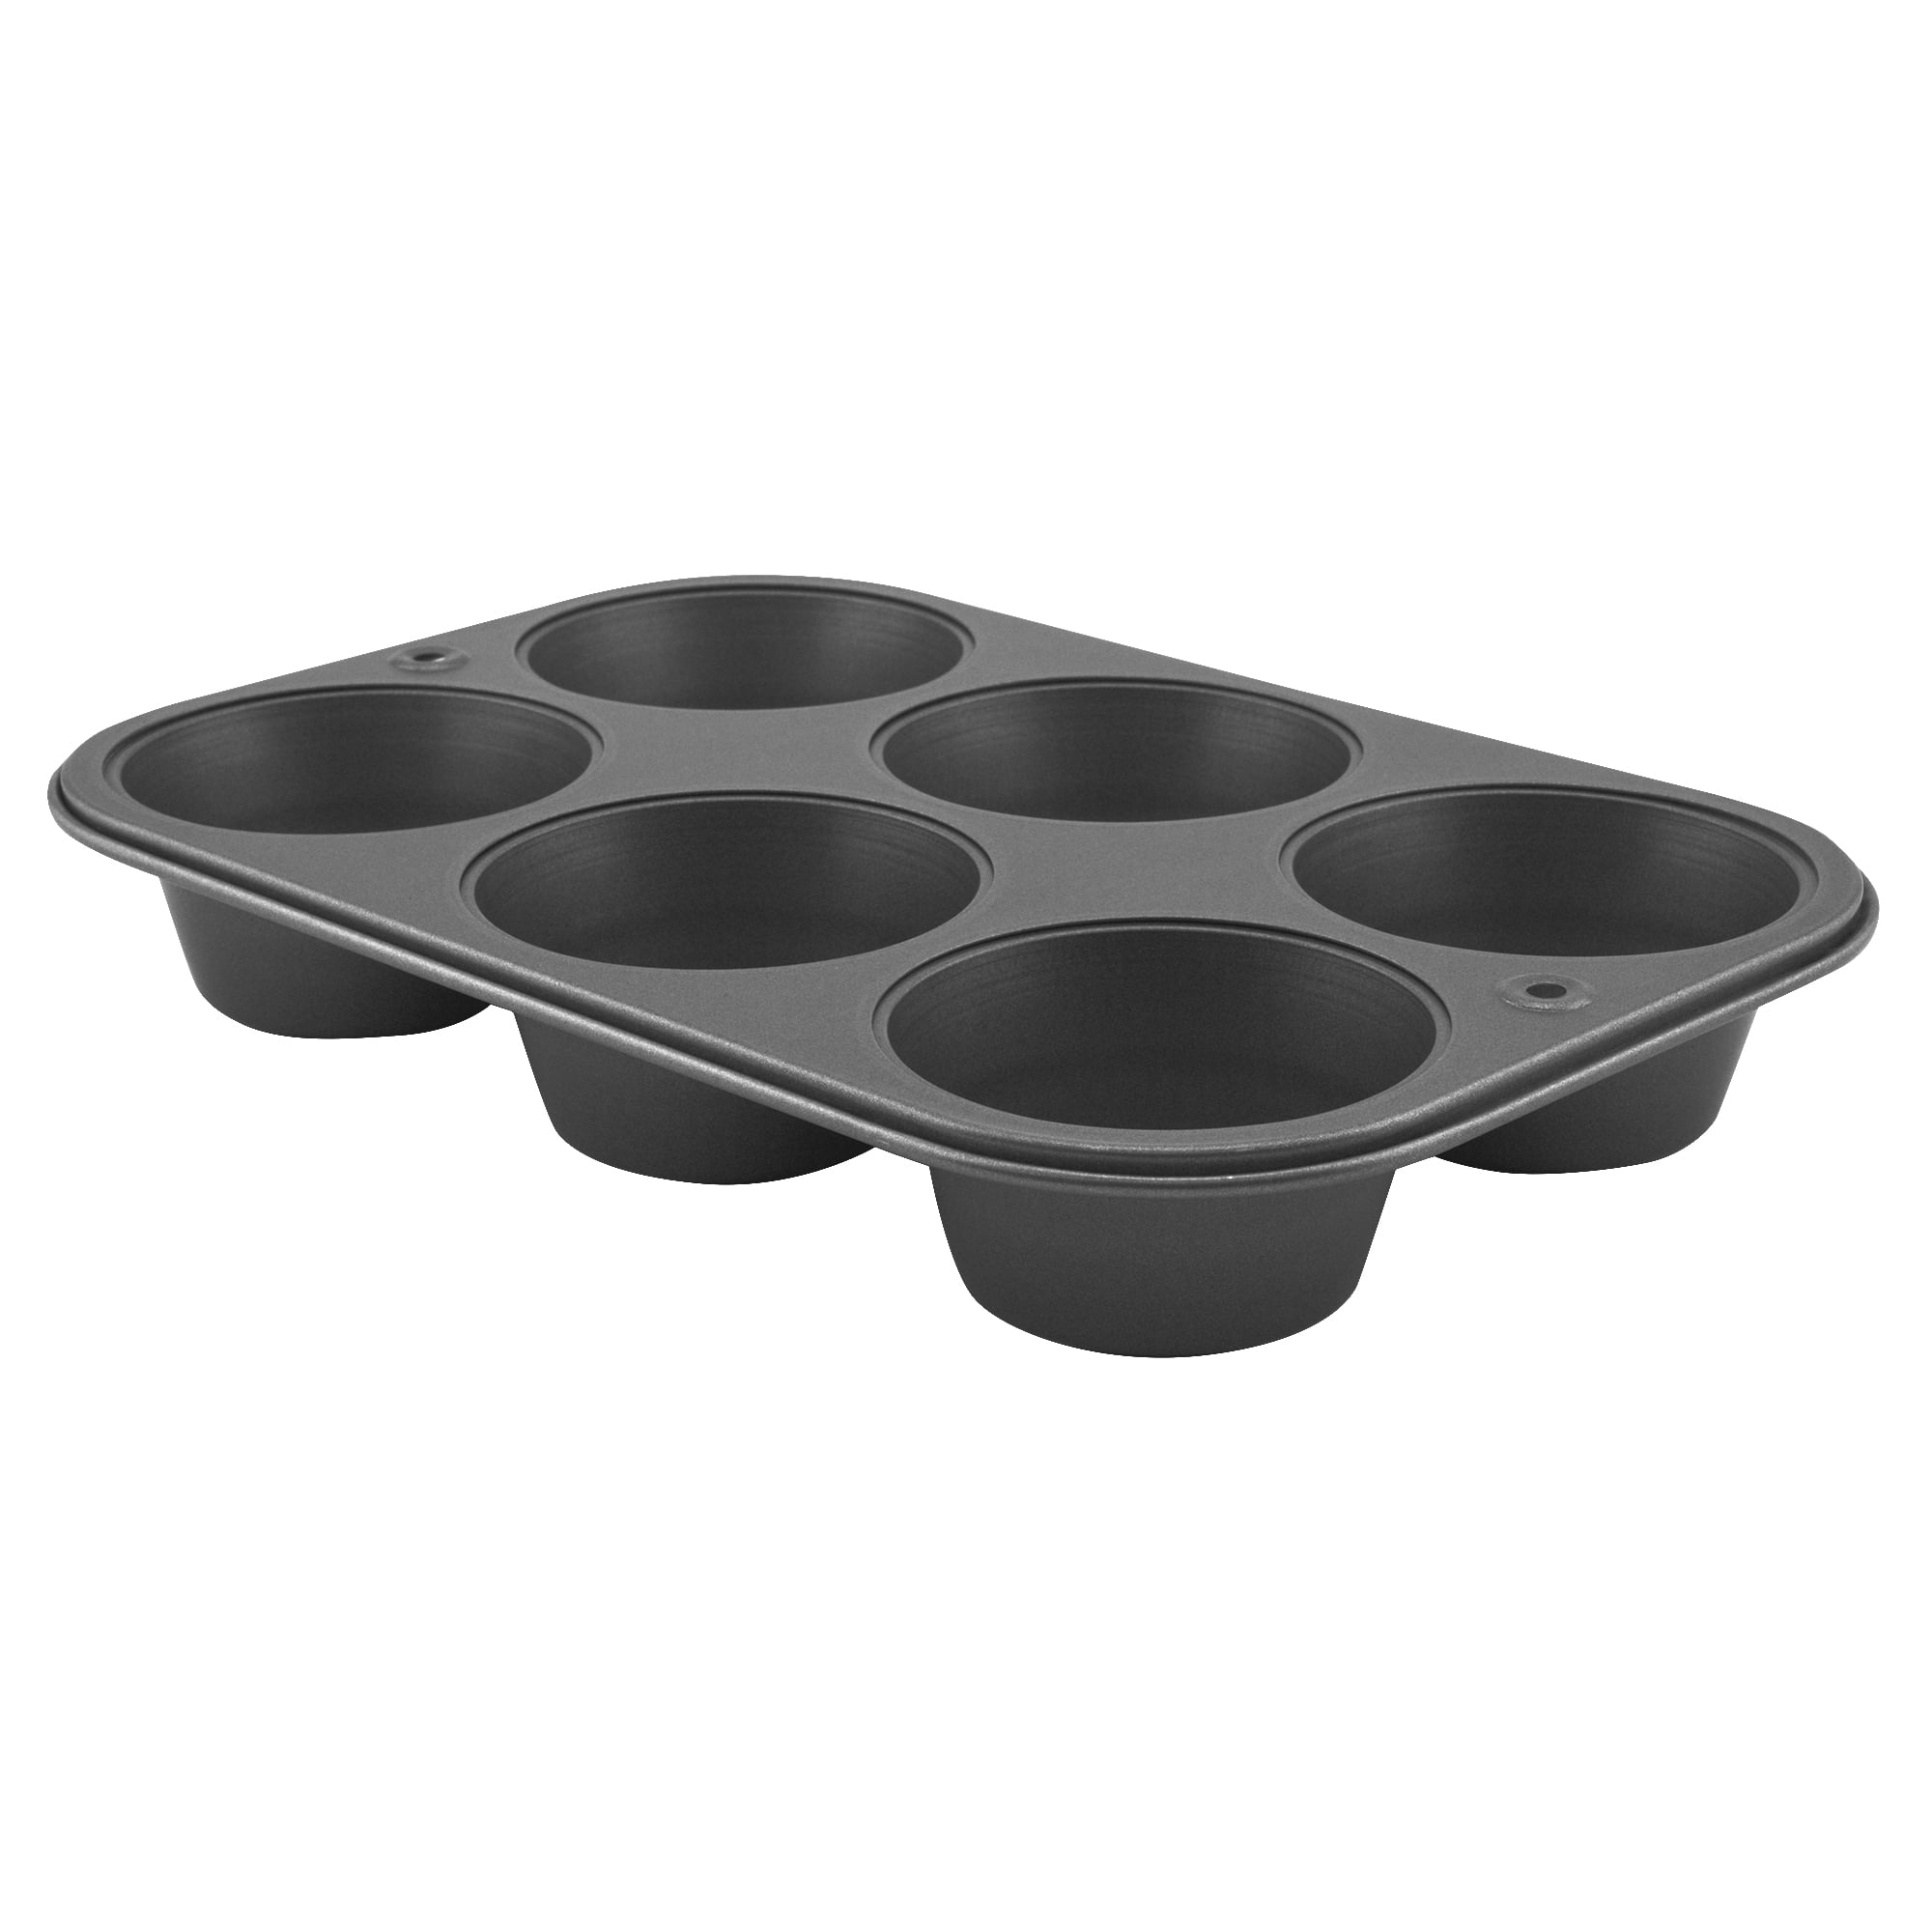 Reston Lloyd Bake Porter 12-Cup Muffin Pan with Serving Cover Red FREE2DAYSHIP 